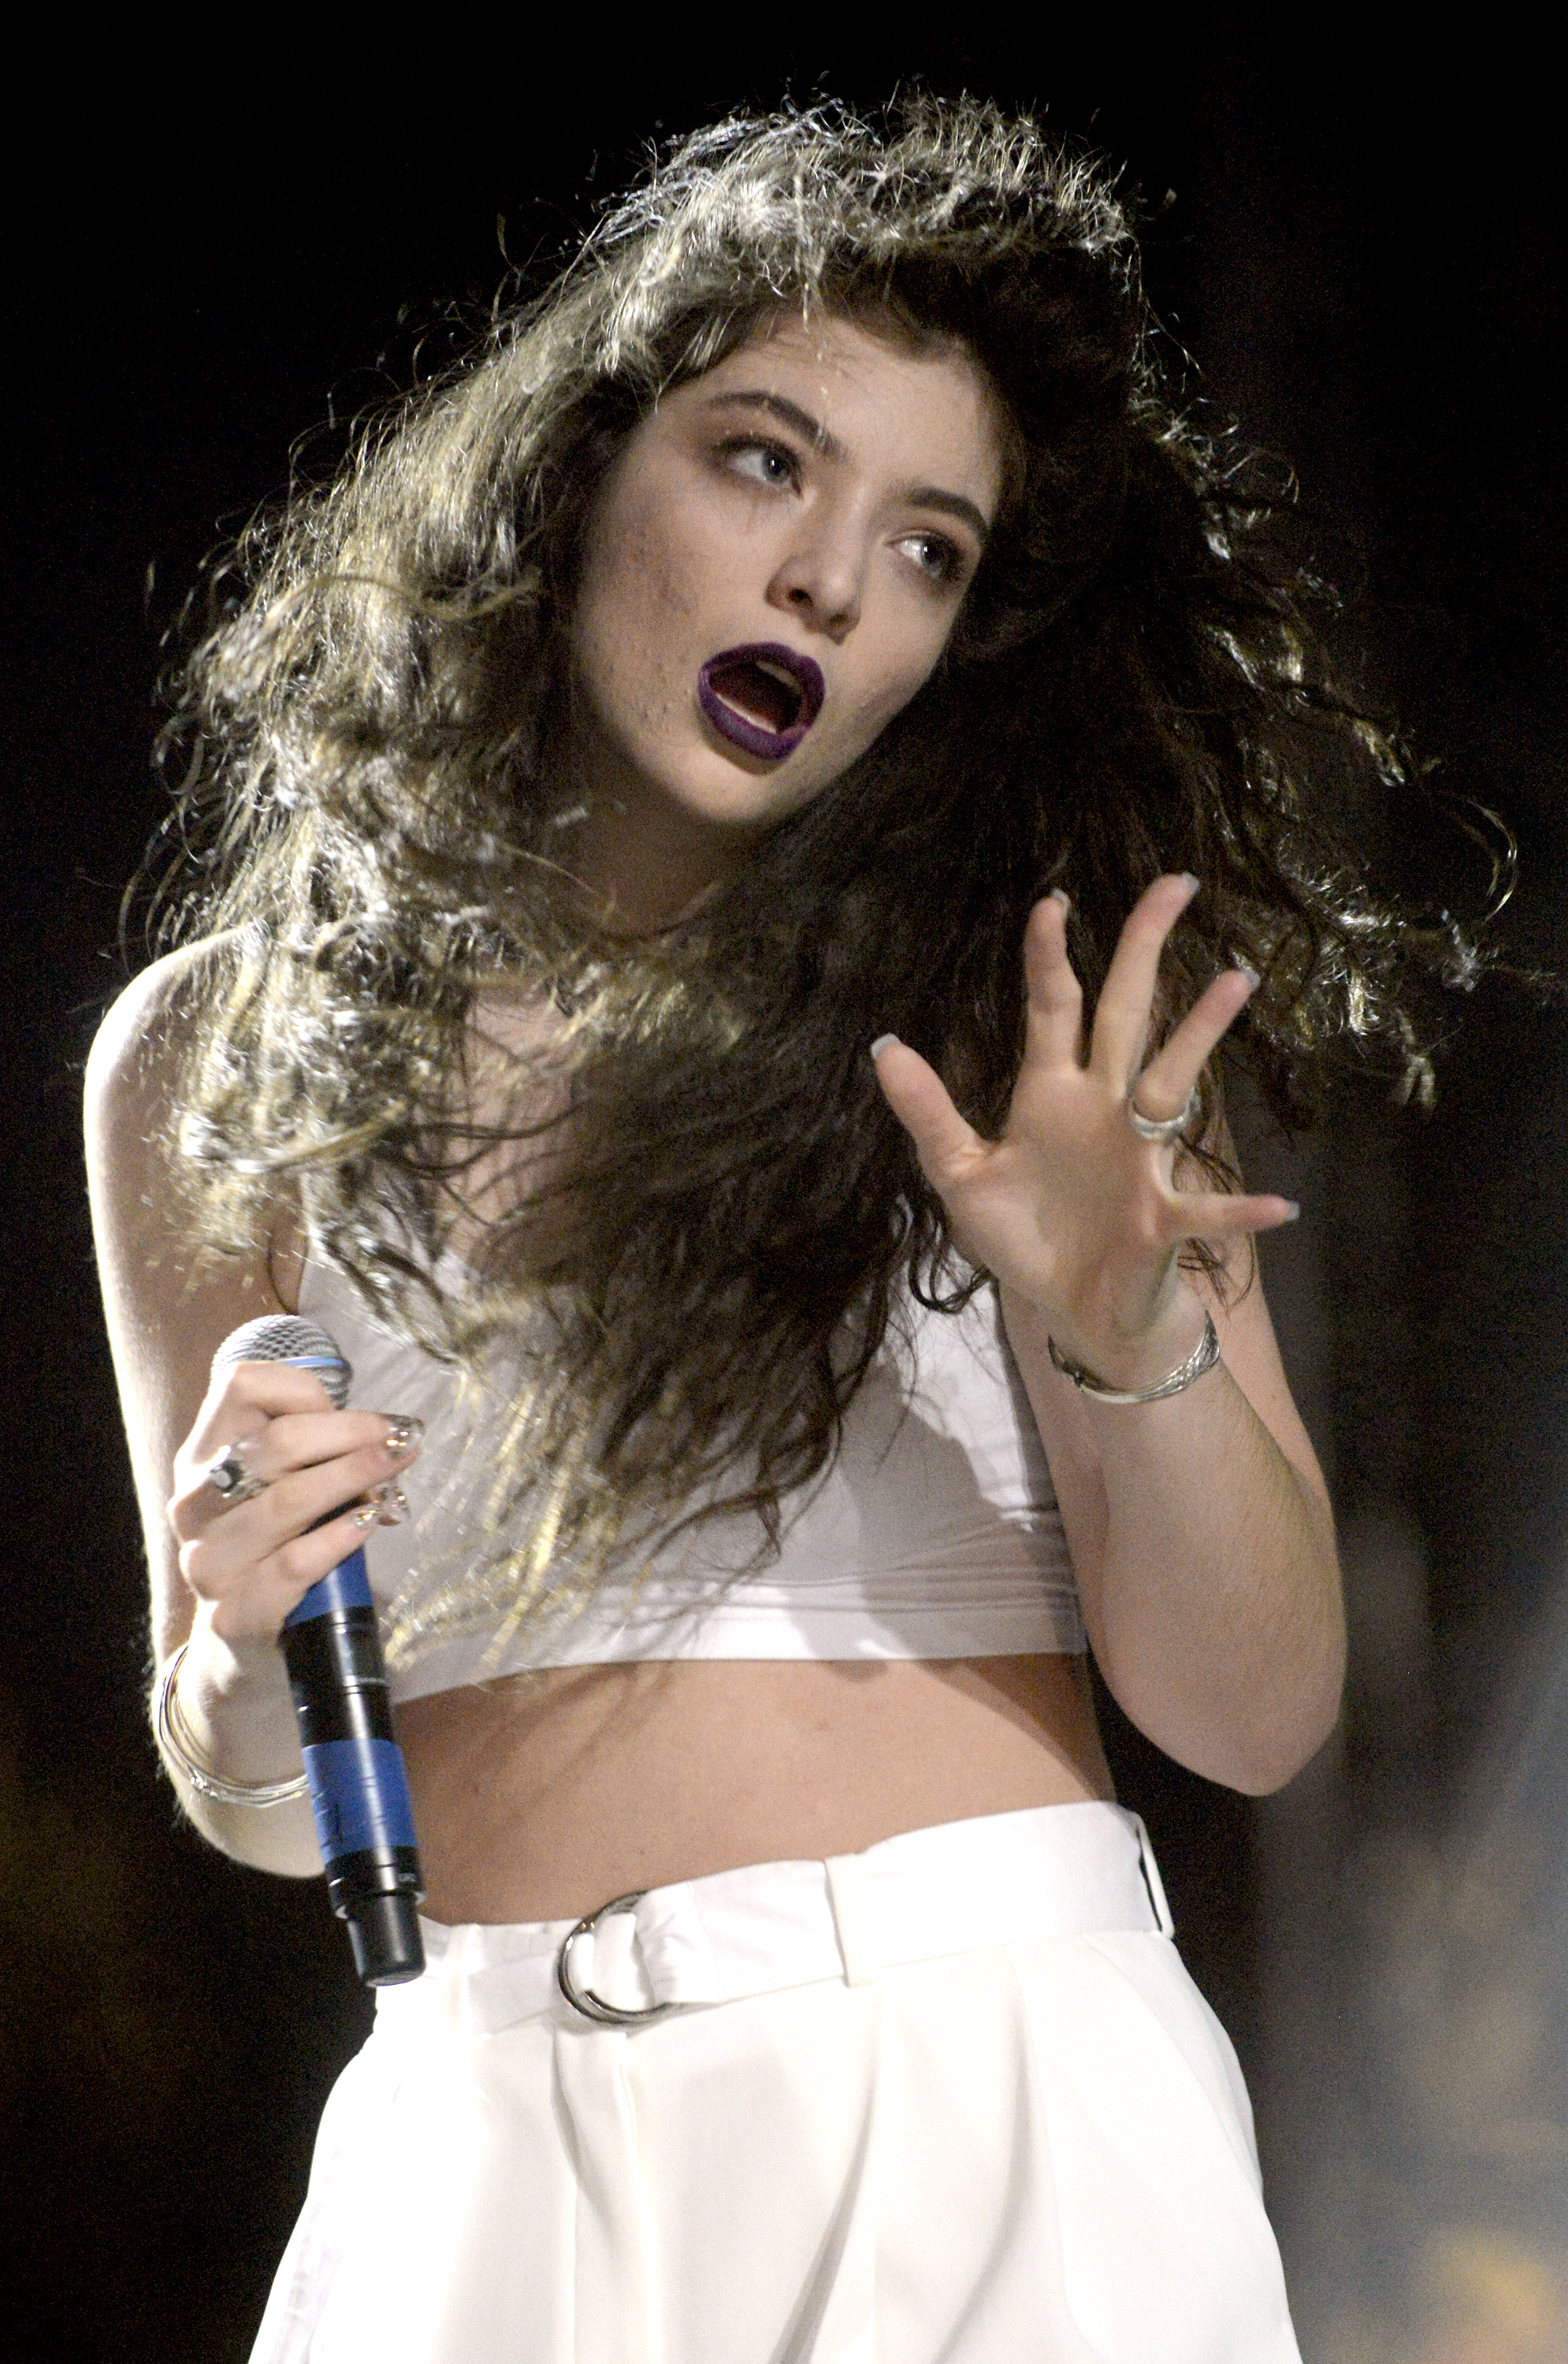 INDIO, CA - APRIL 12:  Lorde performs as part of the Coachella Valley Music and Arts Festival at The Empire Polo Club on April 12, 2014 in Indio, California.  (Photo by Tim Mosenfelder/WireImage) (Tim Mosenfelder—WireImage)